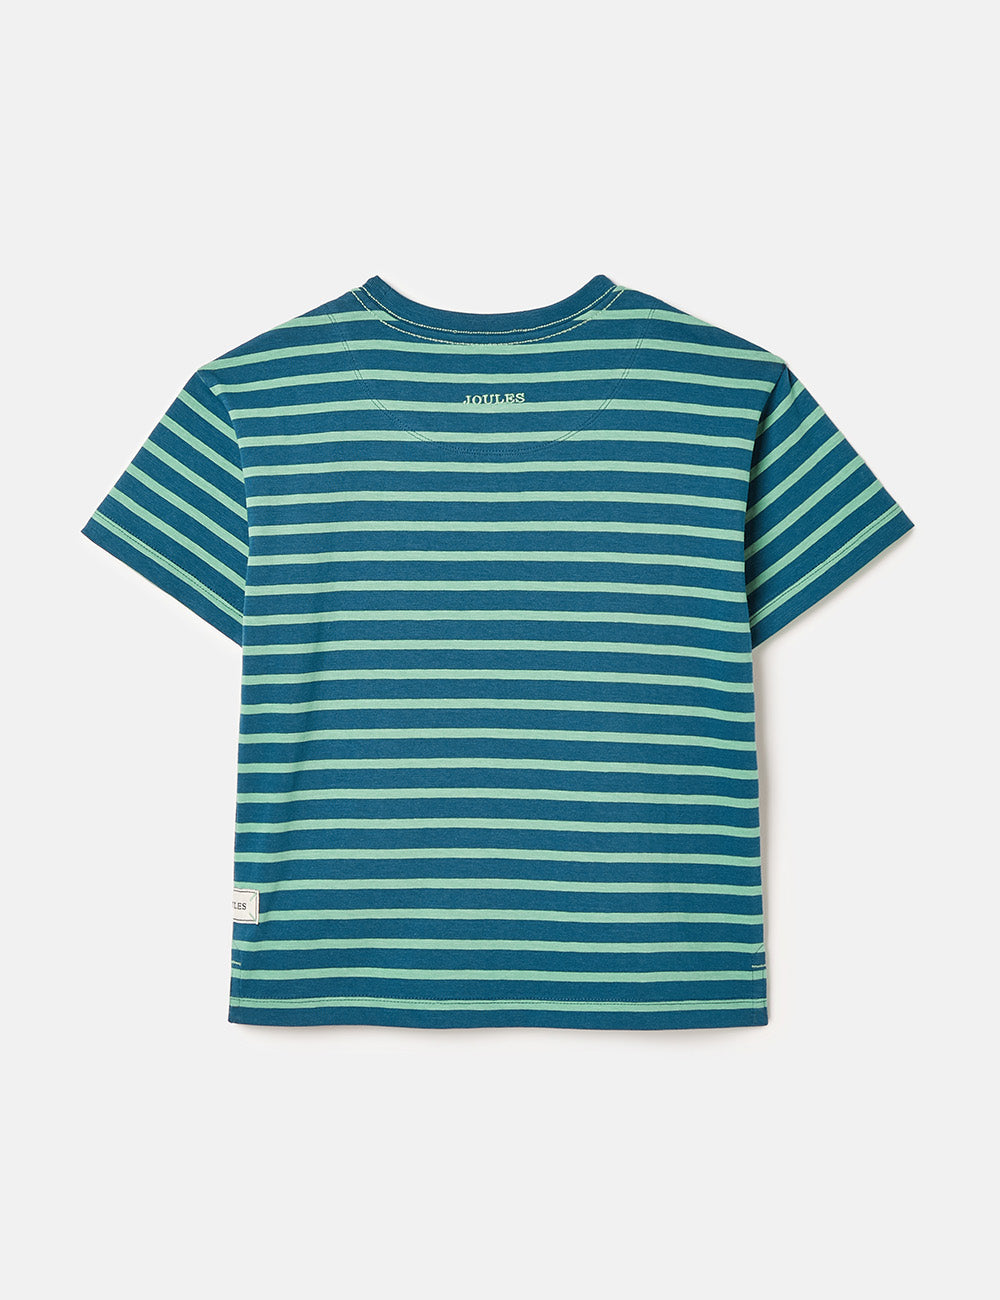 Joules Laundered Stripe T-Shirt - Teal/Navy Stripe